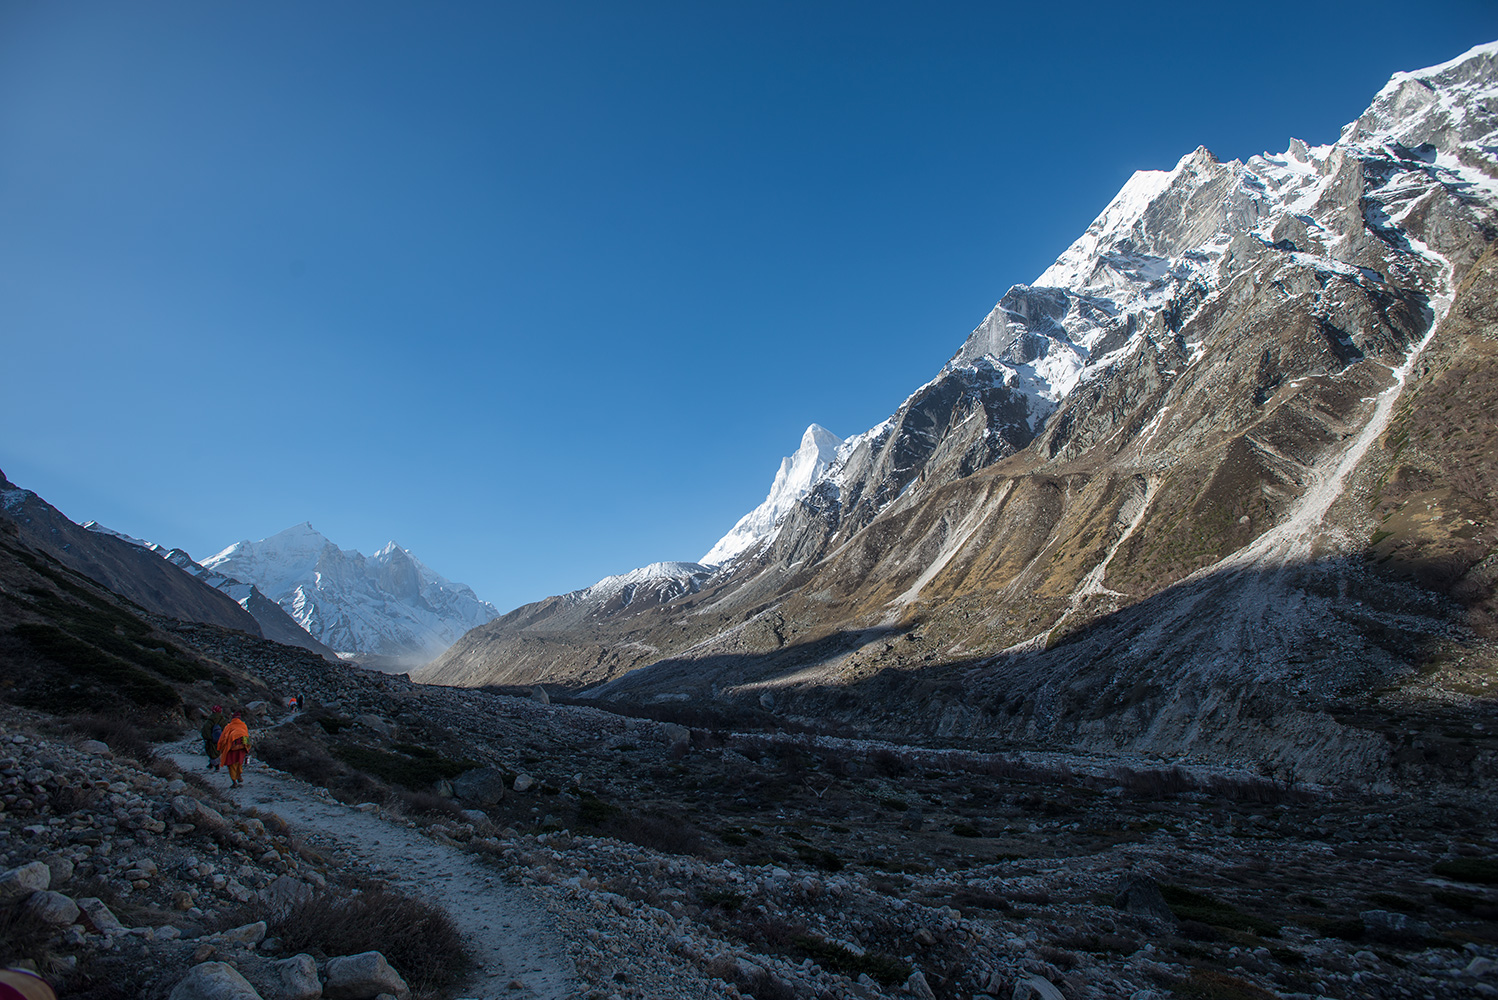 On the trail up to Gaumukh from Bhojbas in the Bhagirathi valley. Early in the morning. Ahead are the Bhagirathi peaks, and Shivling is just appearing to the south.